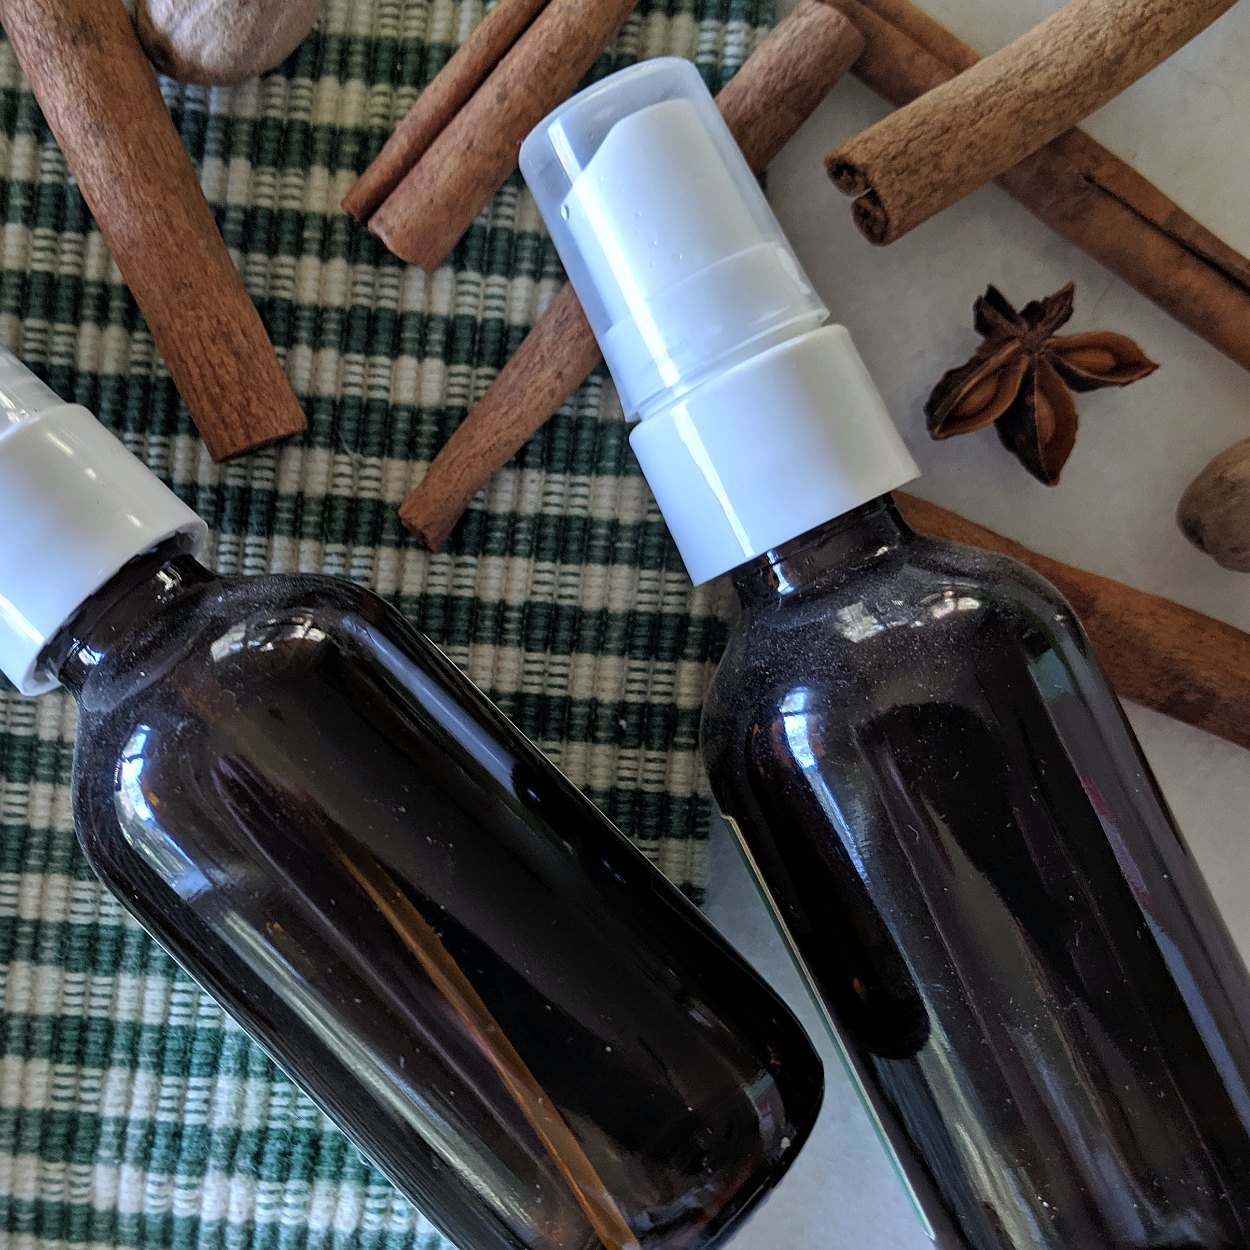 insta essential oil room sprays and fall spices